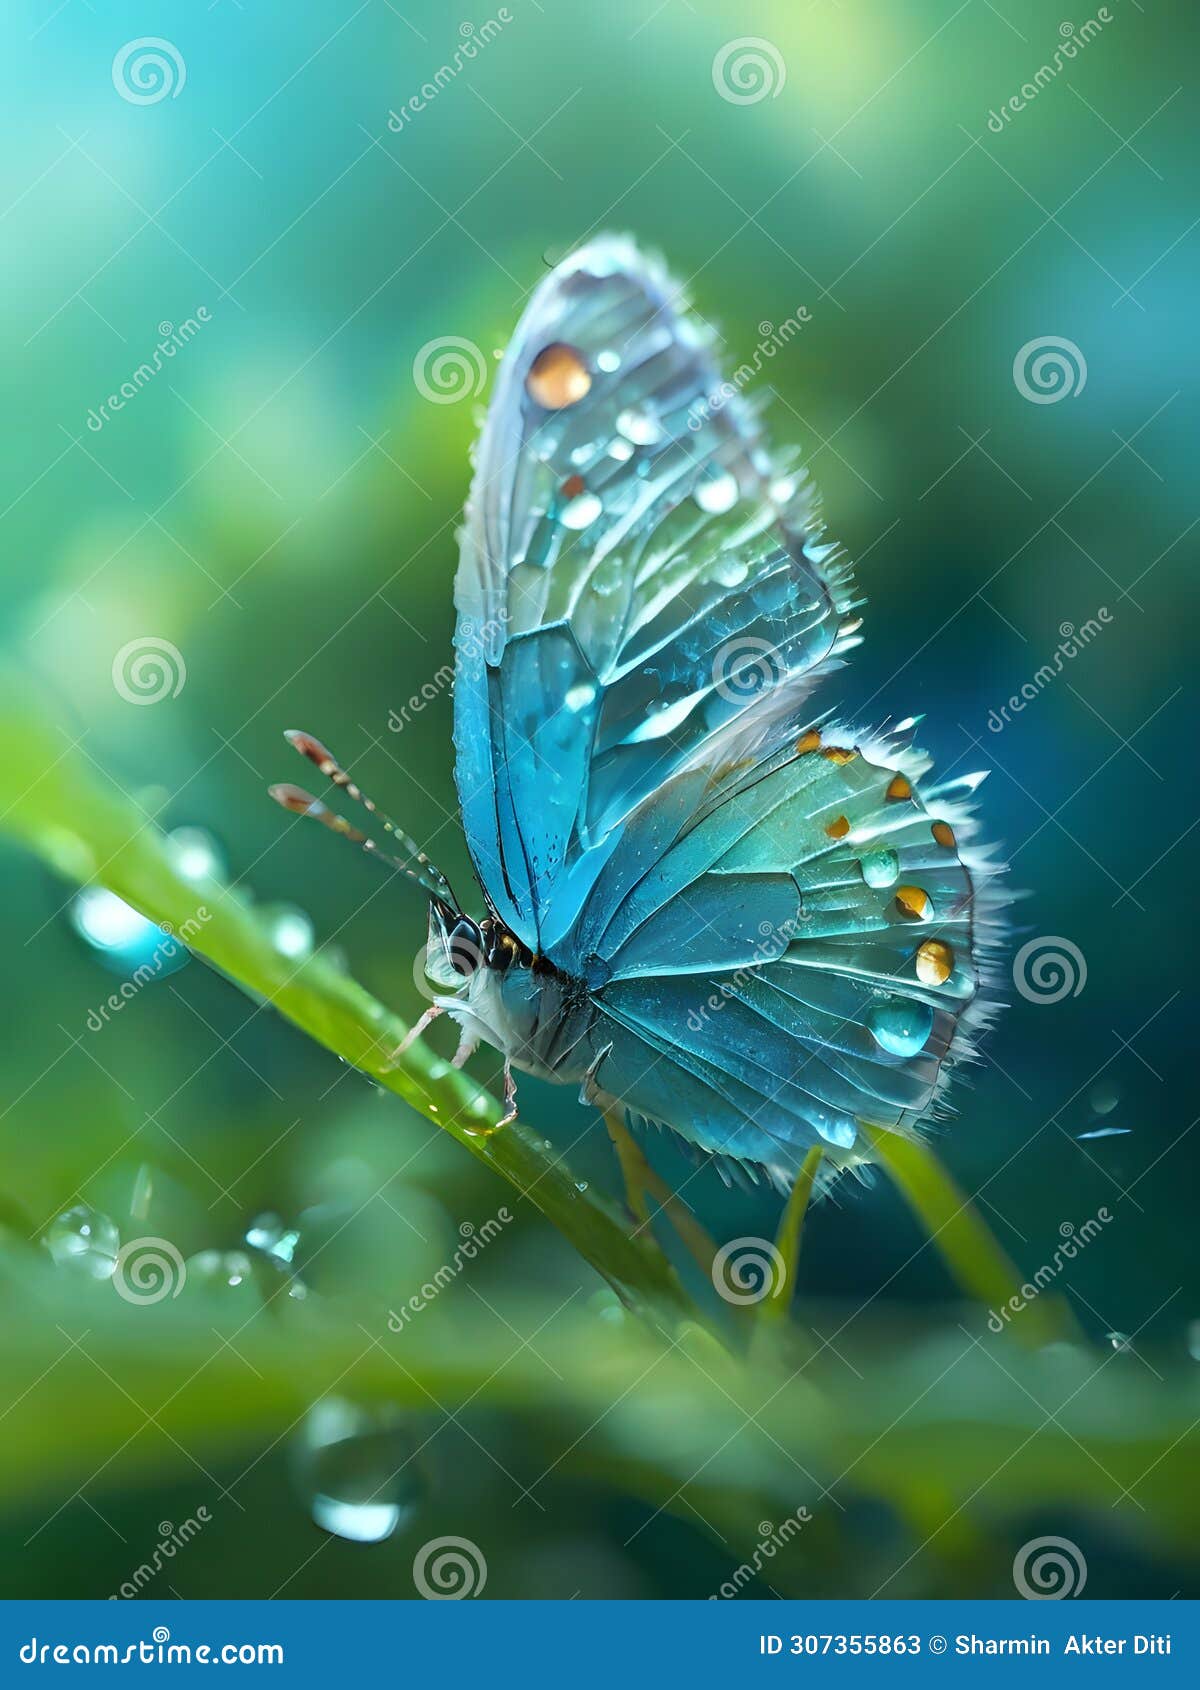 macro photography, miki asai style: translucent baby butterfly, translucent, turquoise color.